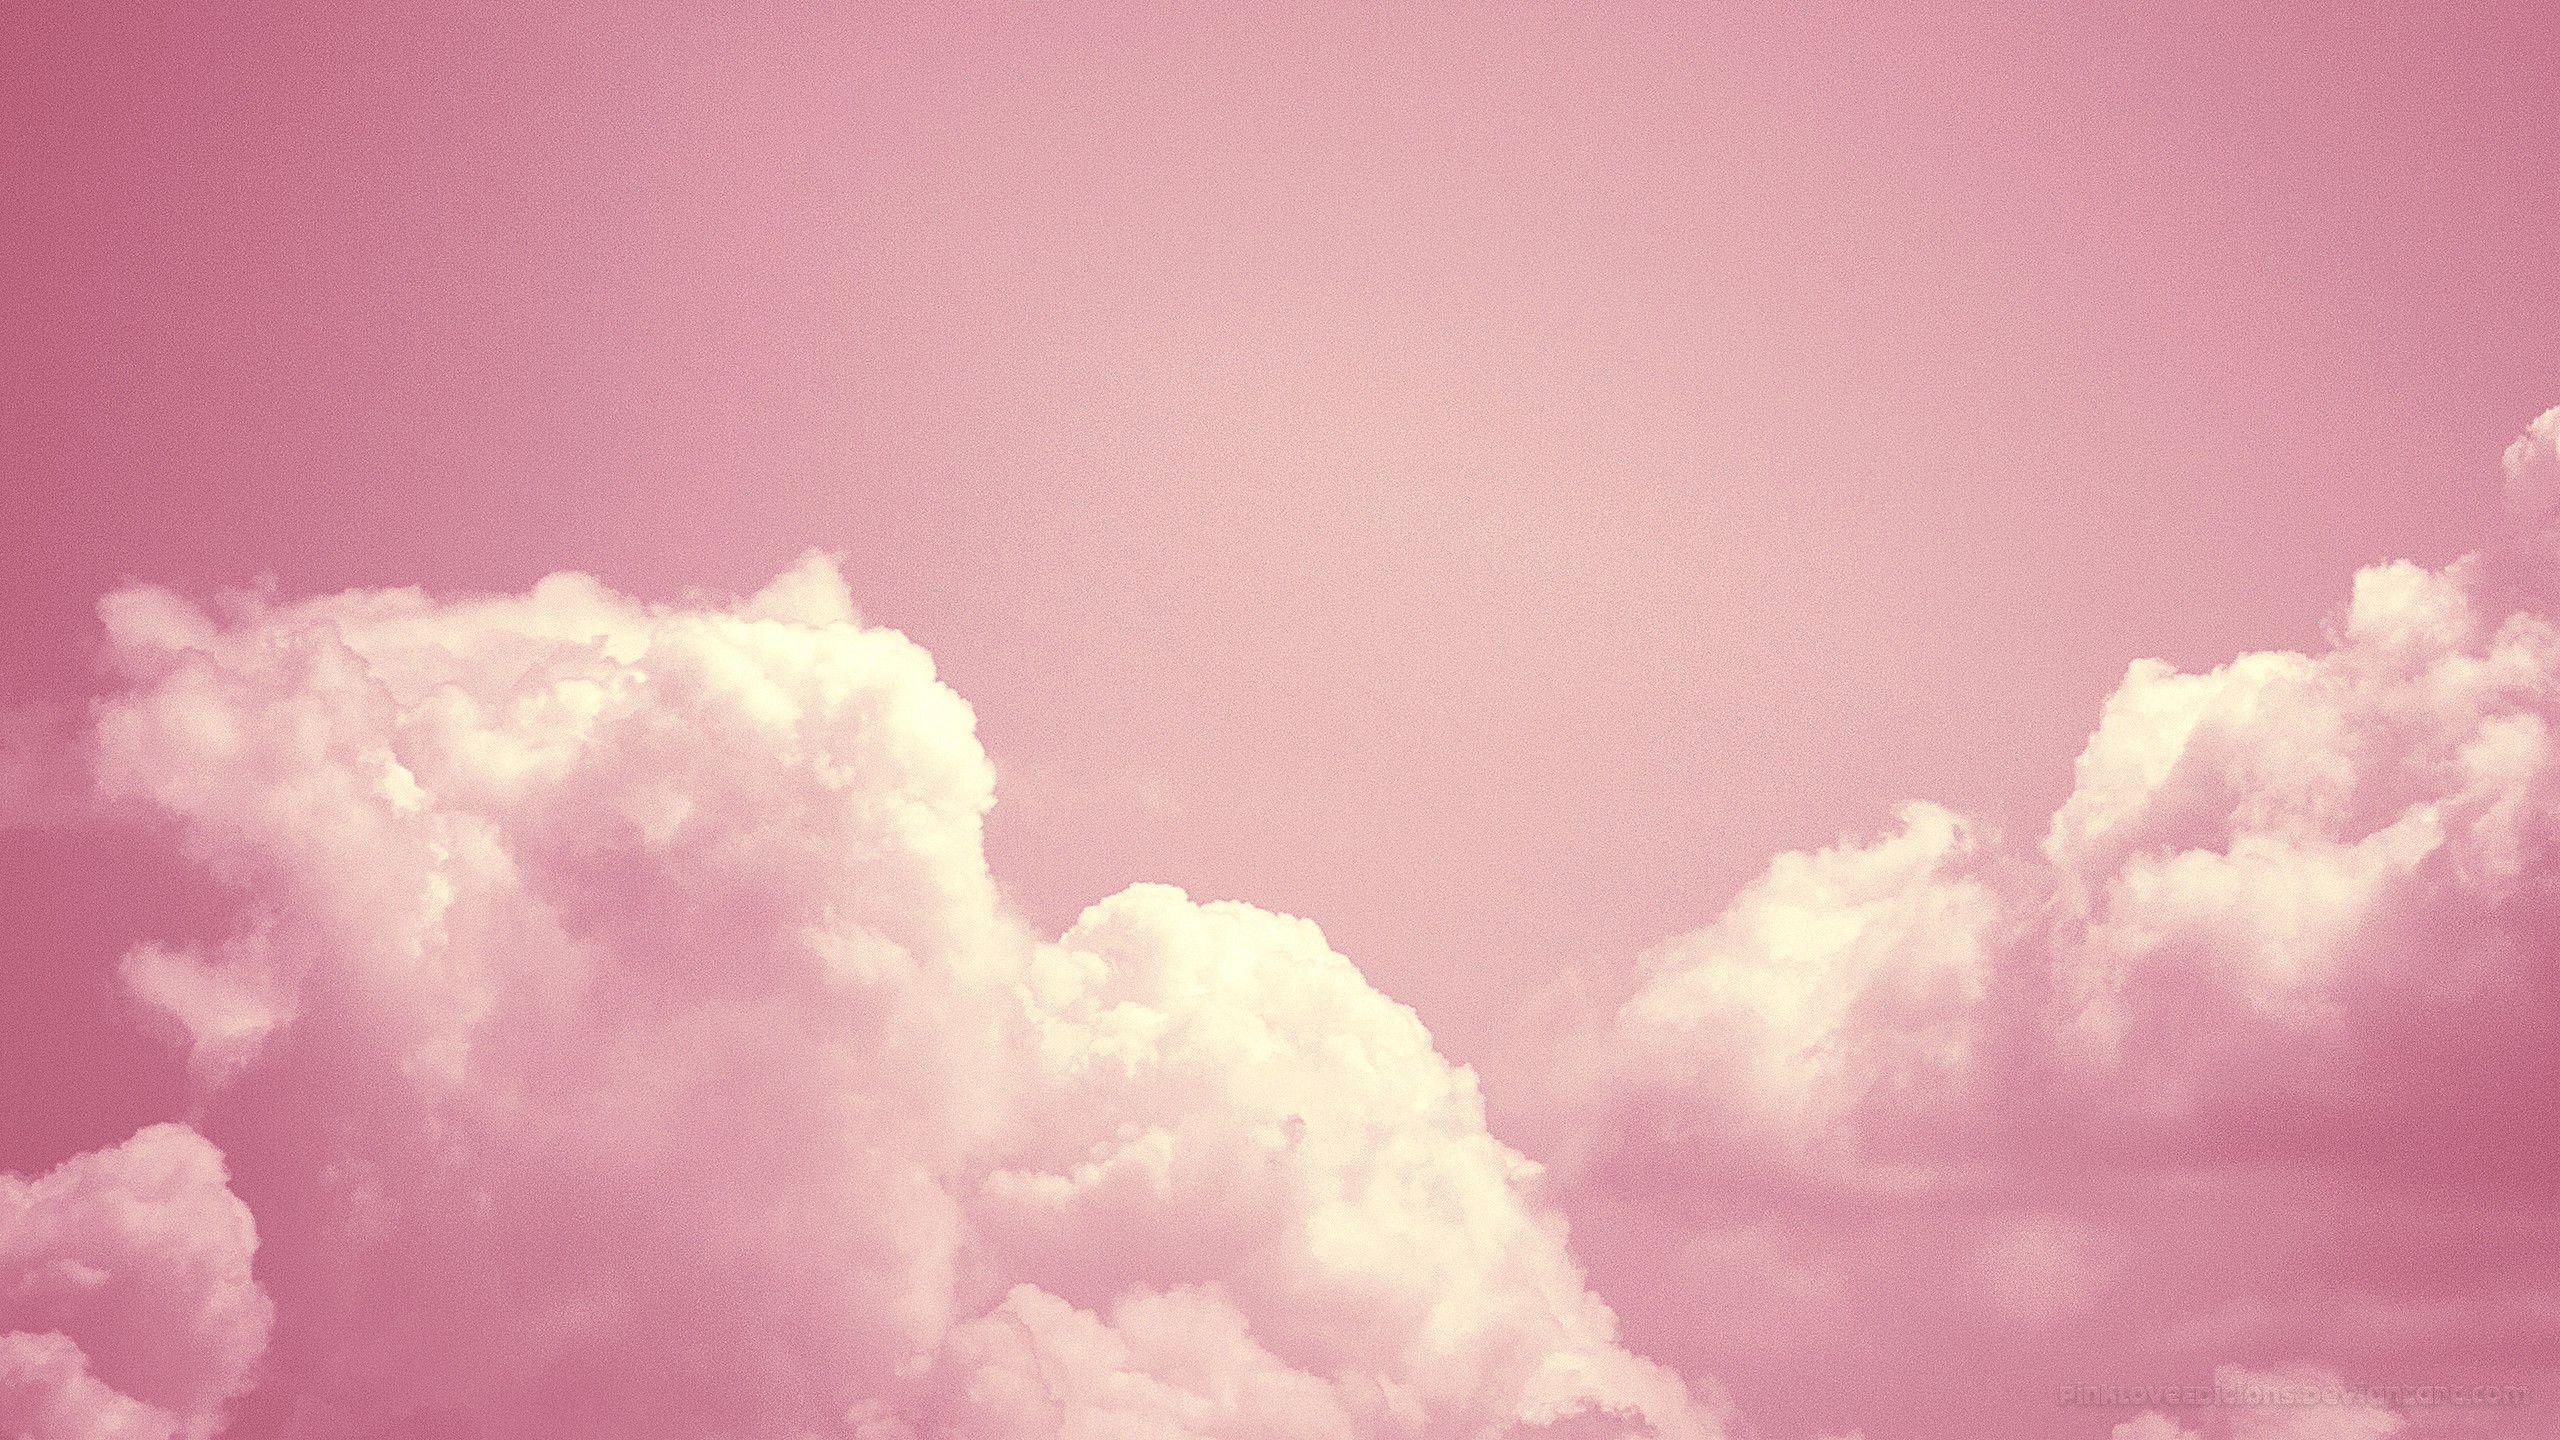 Pink Aesthetic Tumblr Computer Wallpapers - Top Free Pink Aesthetic ...